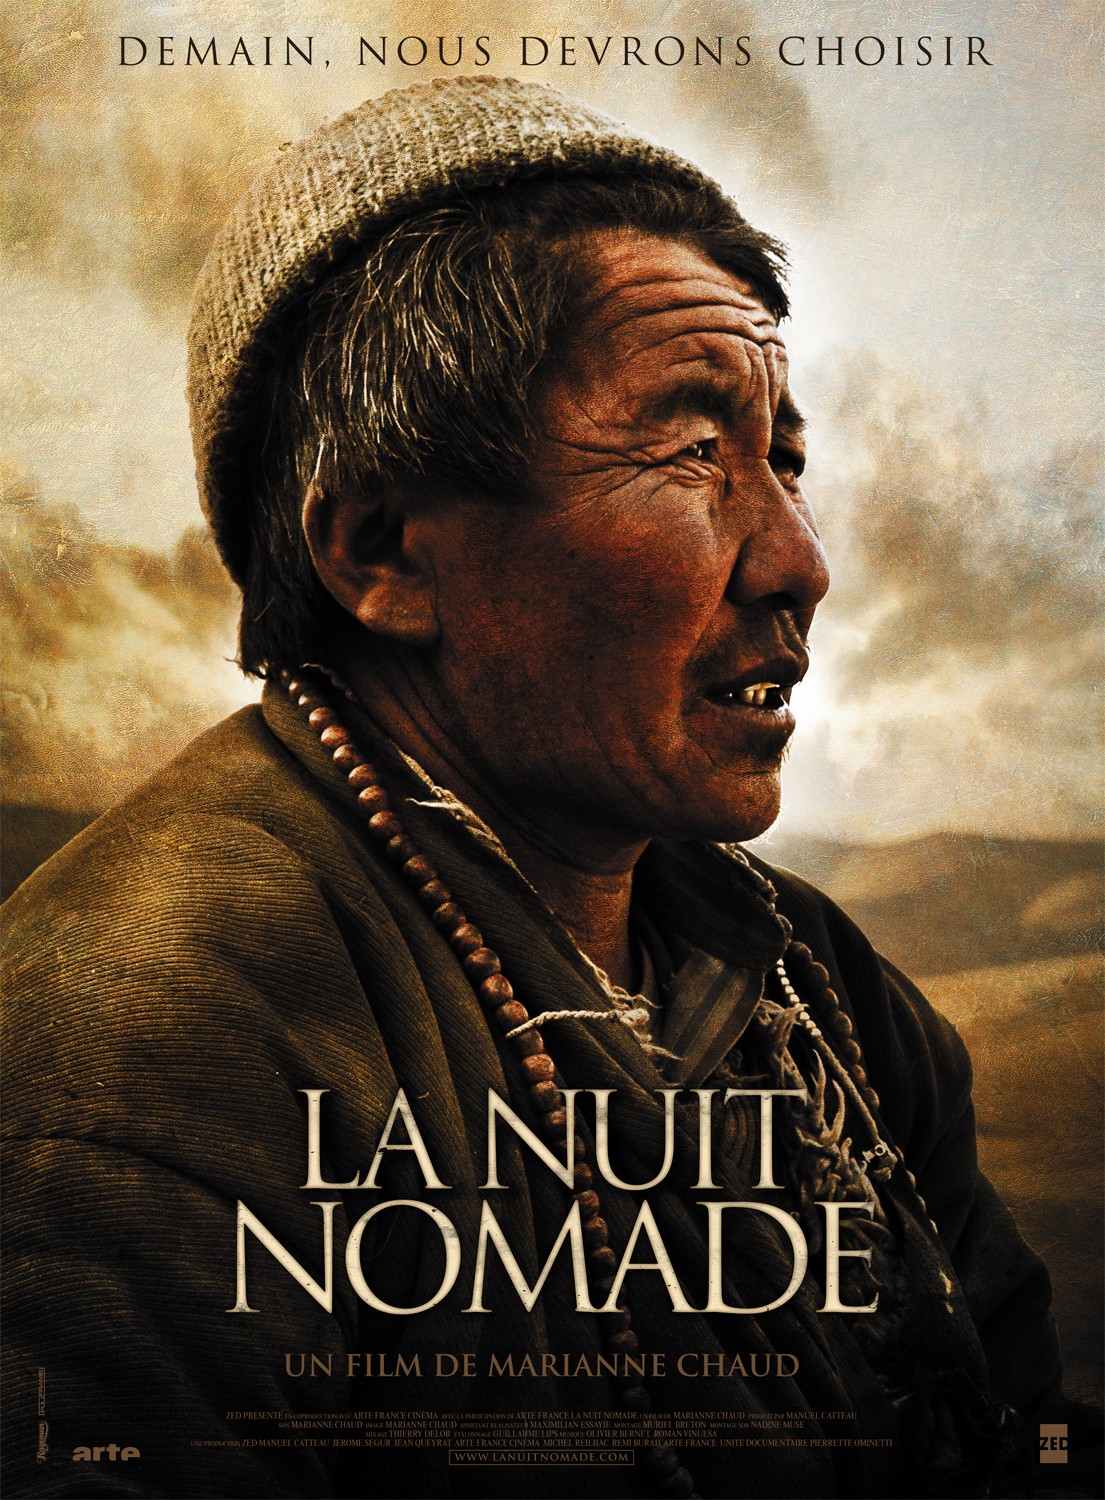 Extra Large Movie Poster Image for La nuit nomade 